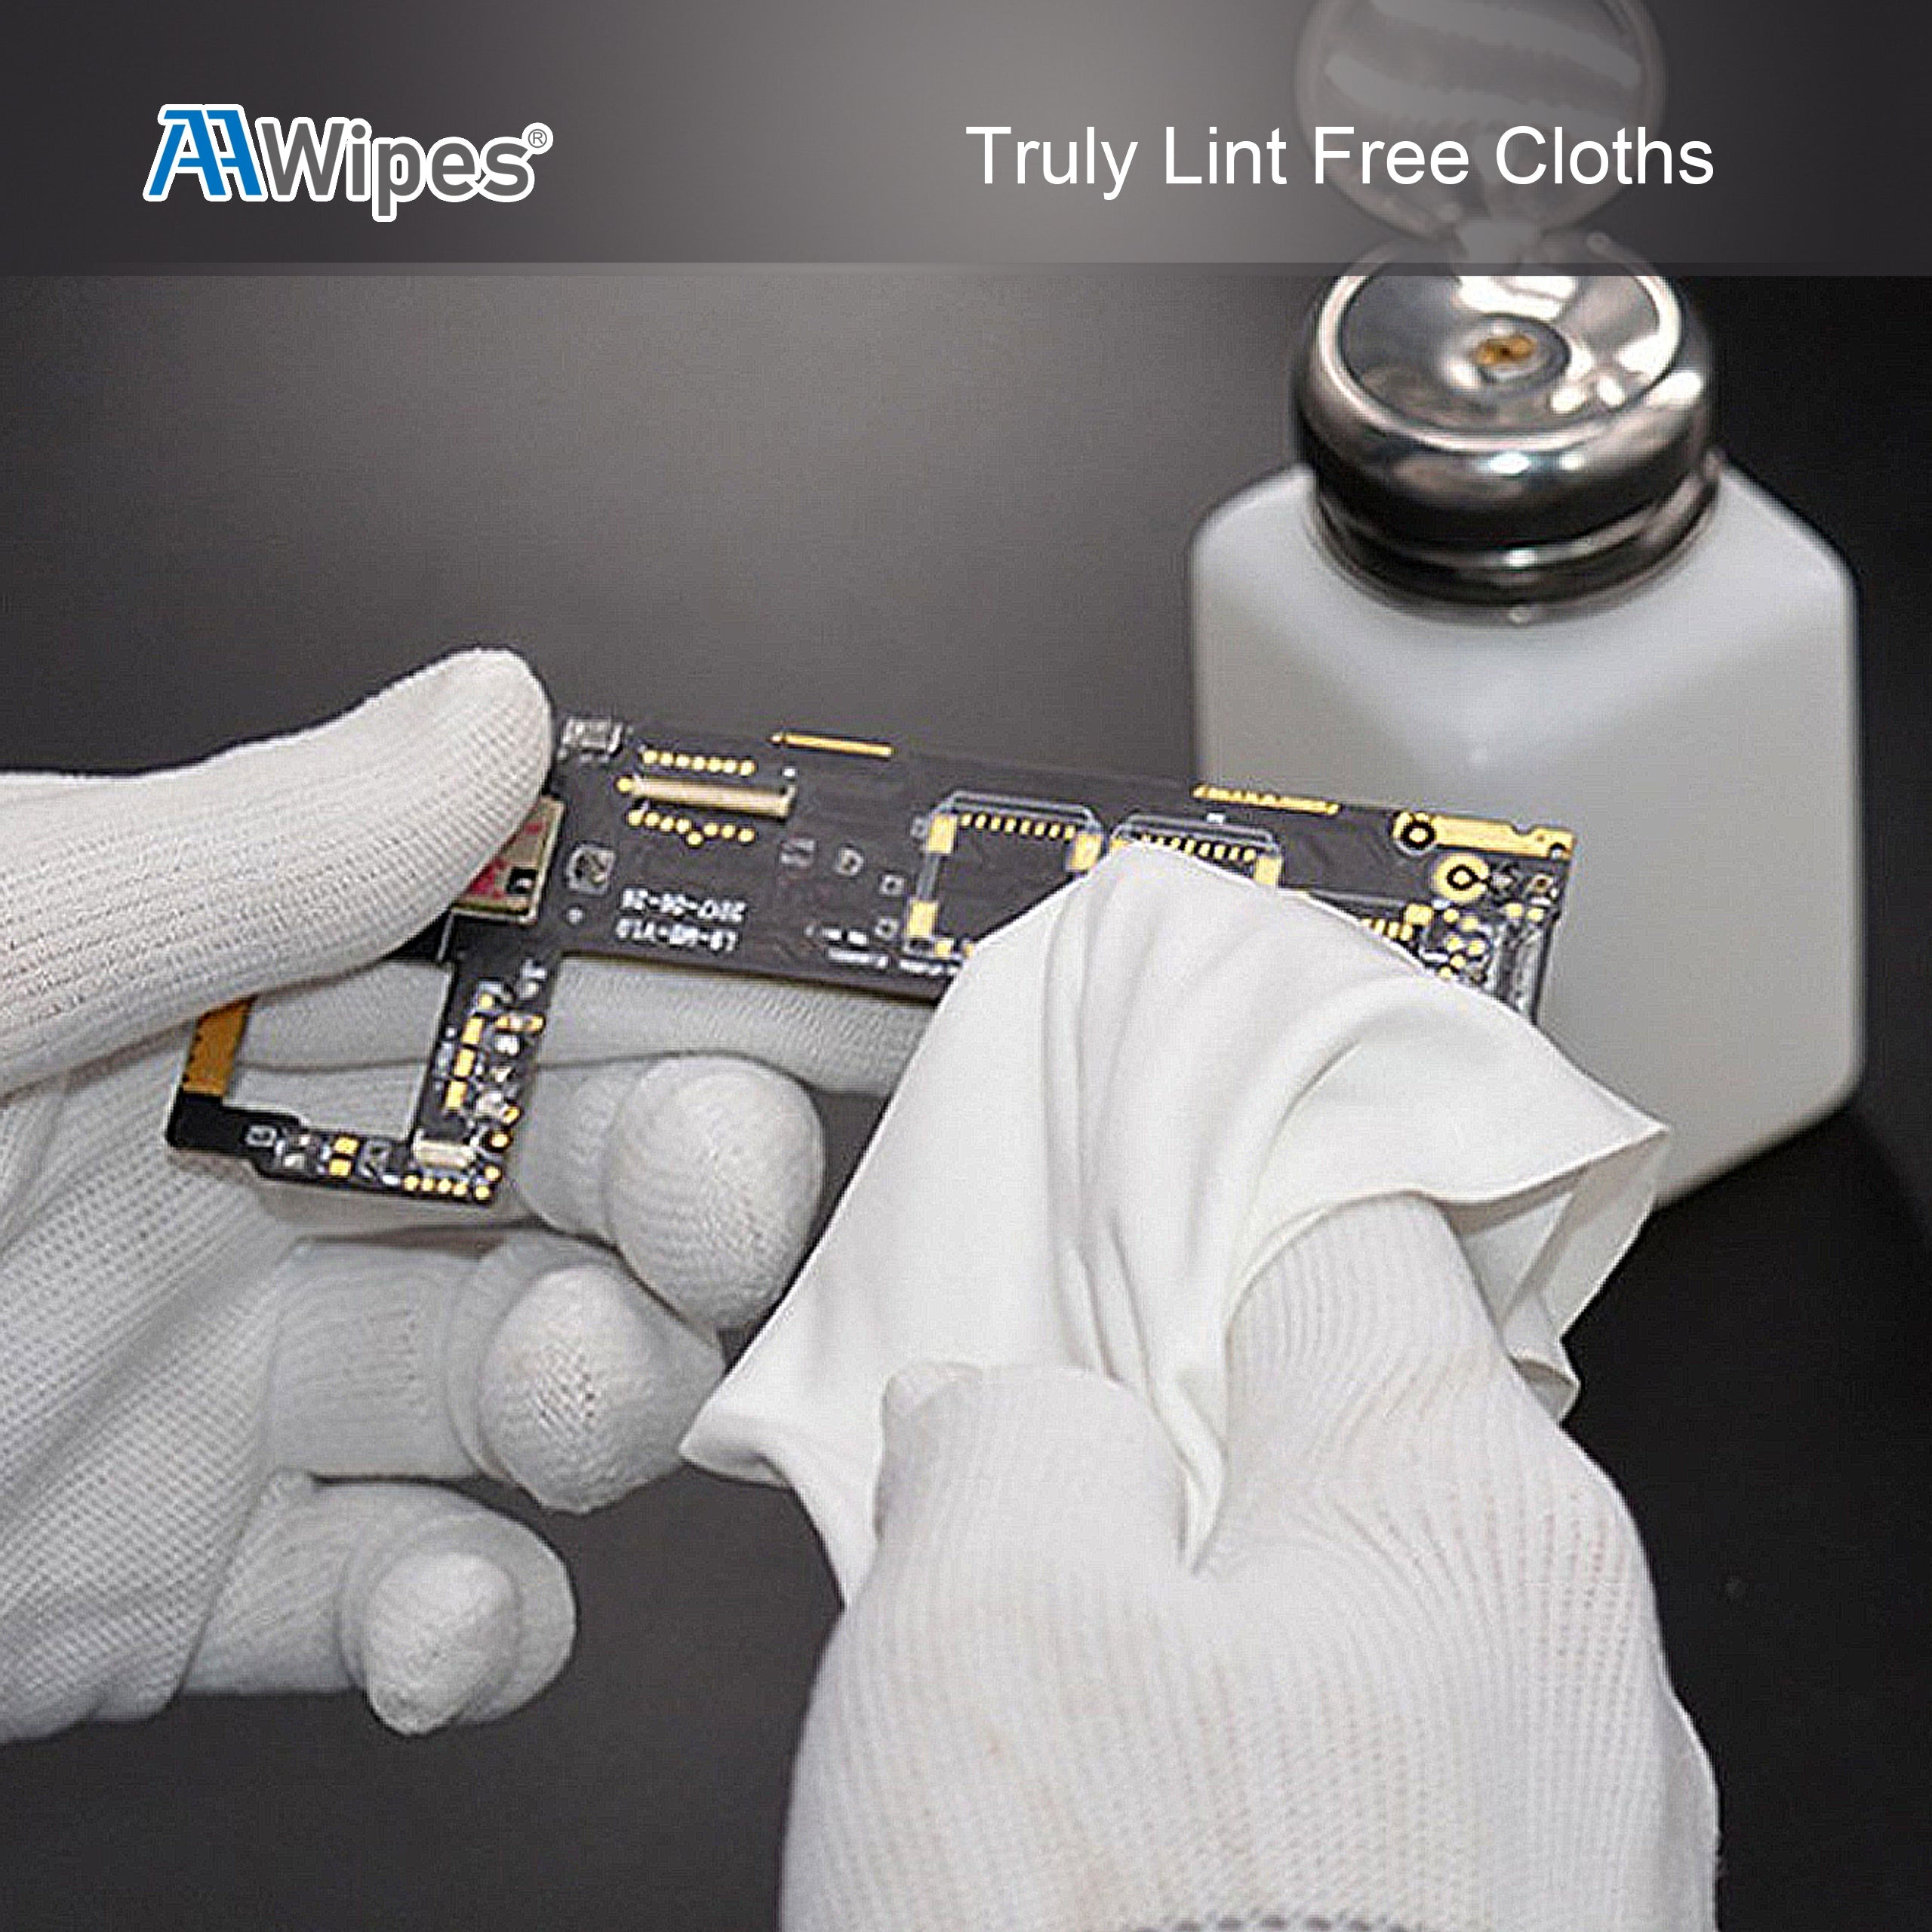 Cleanroom Ultrafine Microfiber Wipers 6"x6" (Starting at 1 Box with 5,000 Wipes per 50 Bags, 180gsm), Laser Sealed Edge, Class 100 Cloths (No. MF18006)